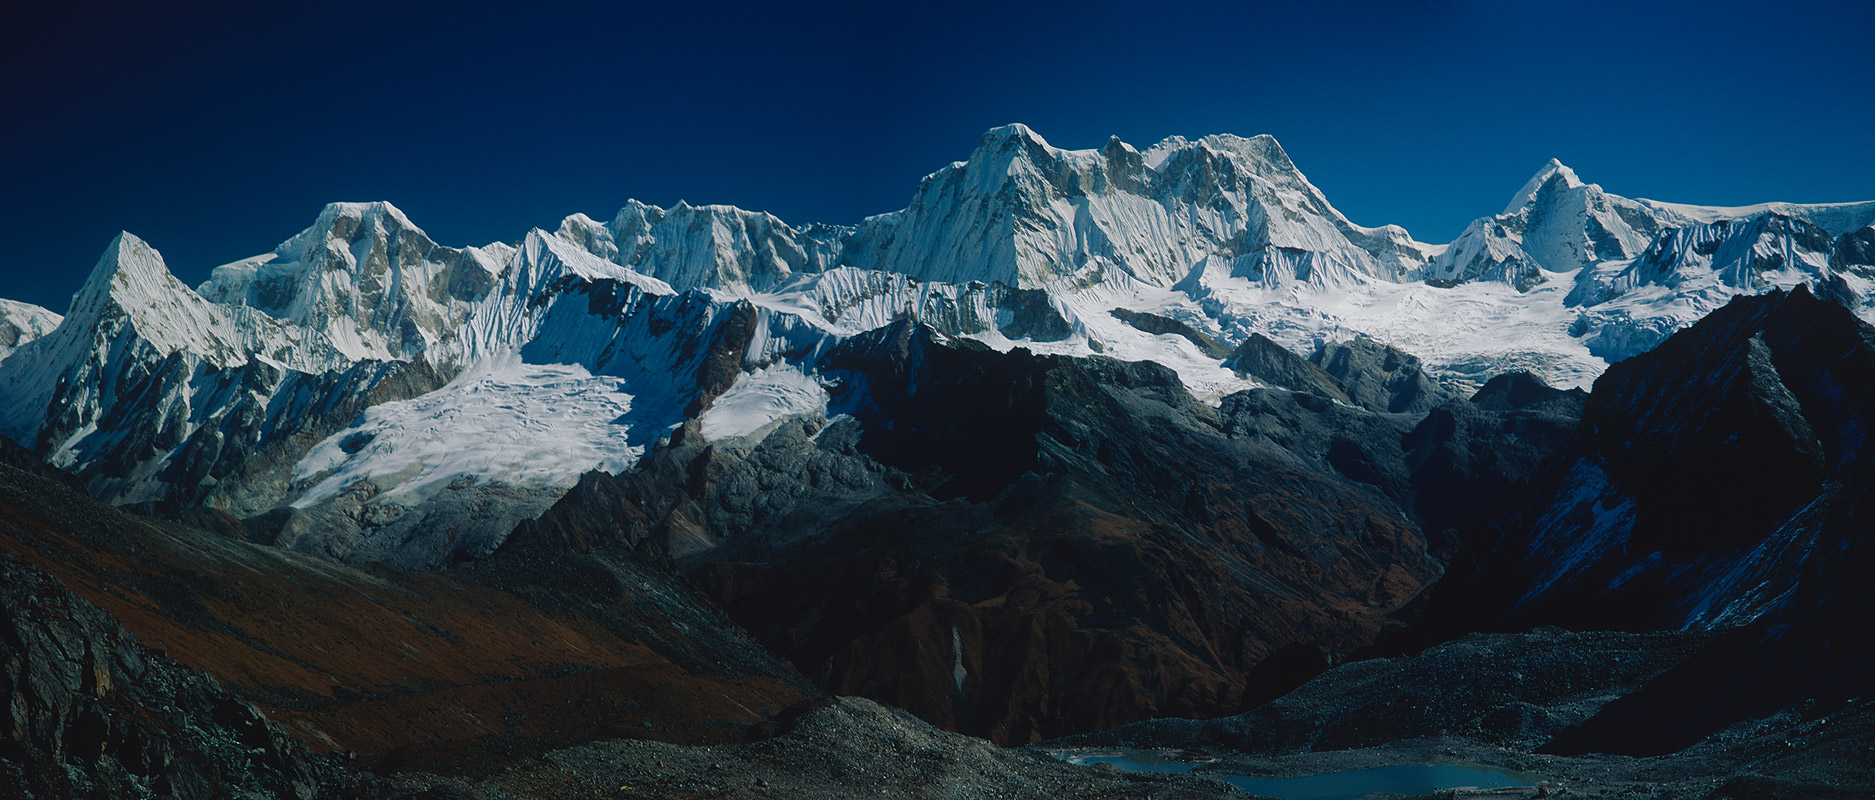 A panorama of three telephotos, taken from the crest of the Kanglakarchung La on the Snowman Trek. Stitched together in Photoshop to make a 14,000 pixel wide image. The central peak is Teri Kang, 7127m.Bronica ETRSi, 150mm, Fuji Velvia